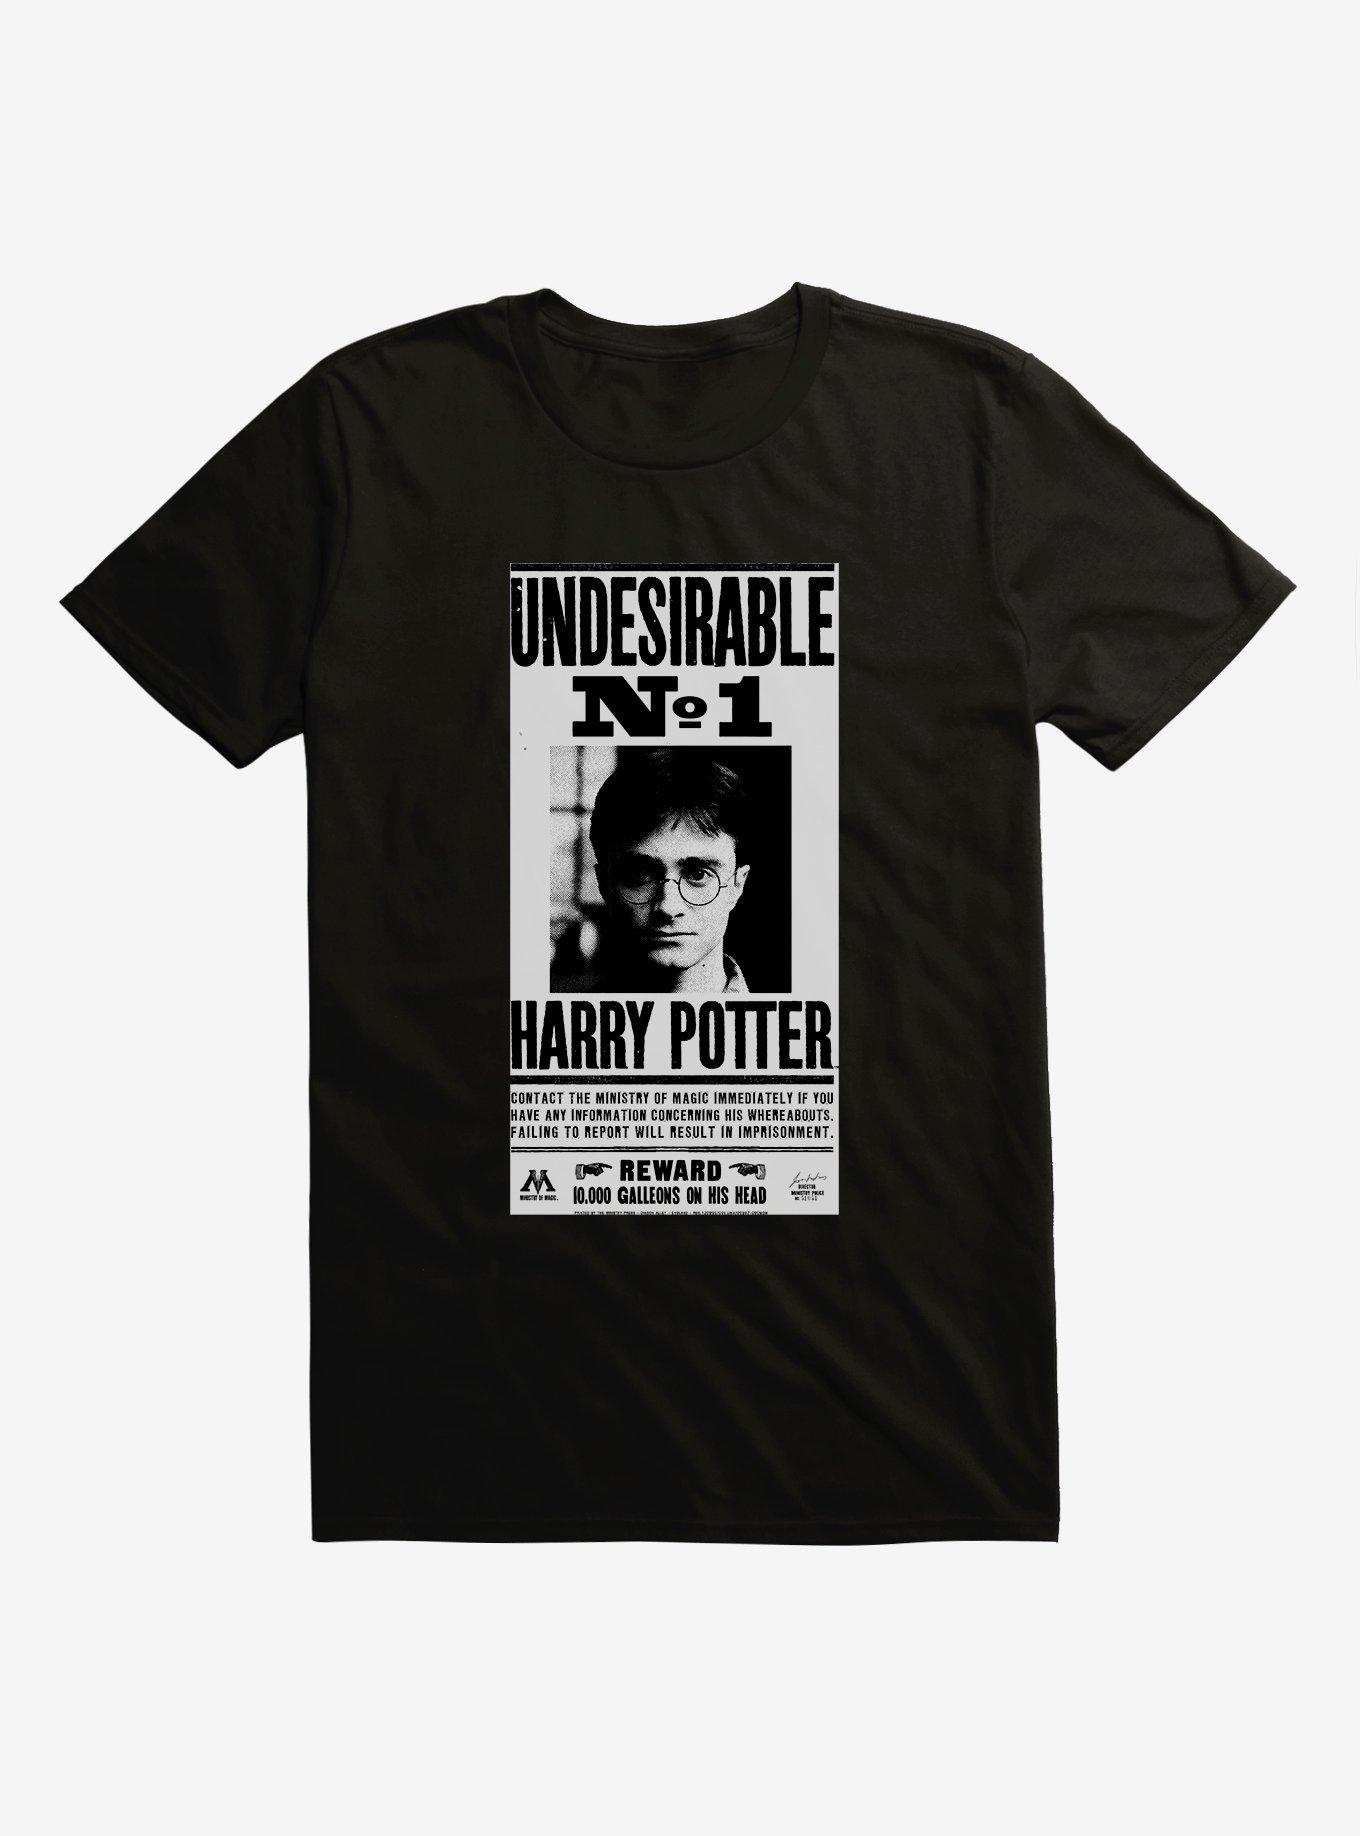 Harry Potter Undesirable No. 1 Warrant T-Shirt